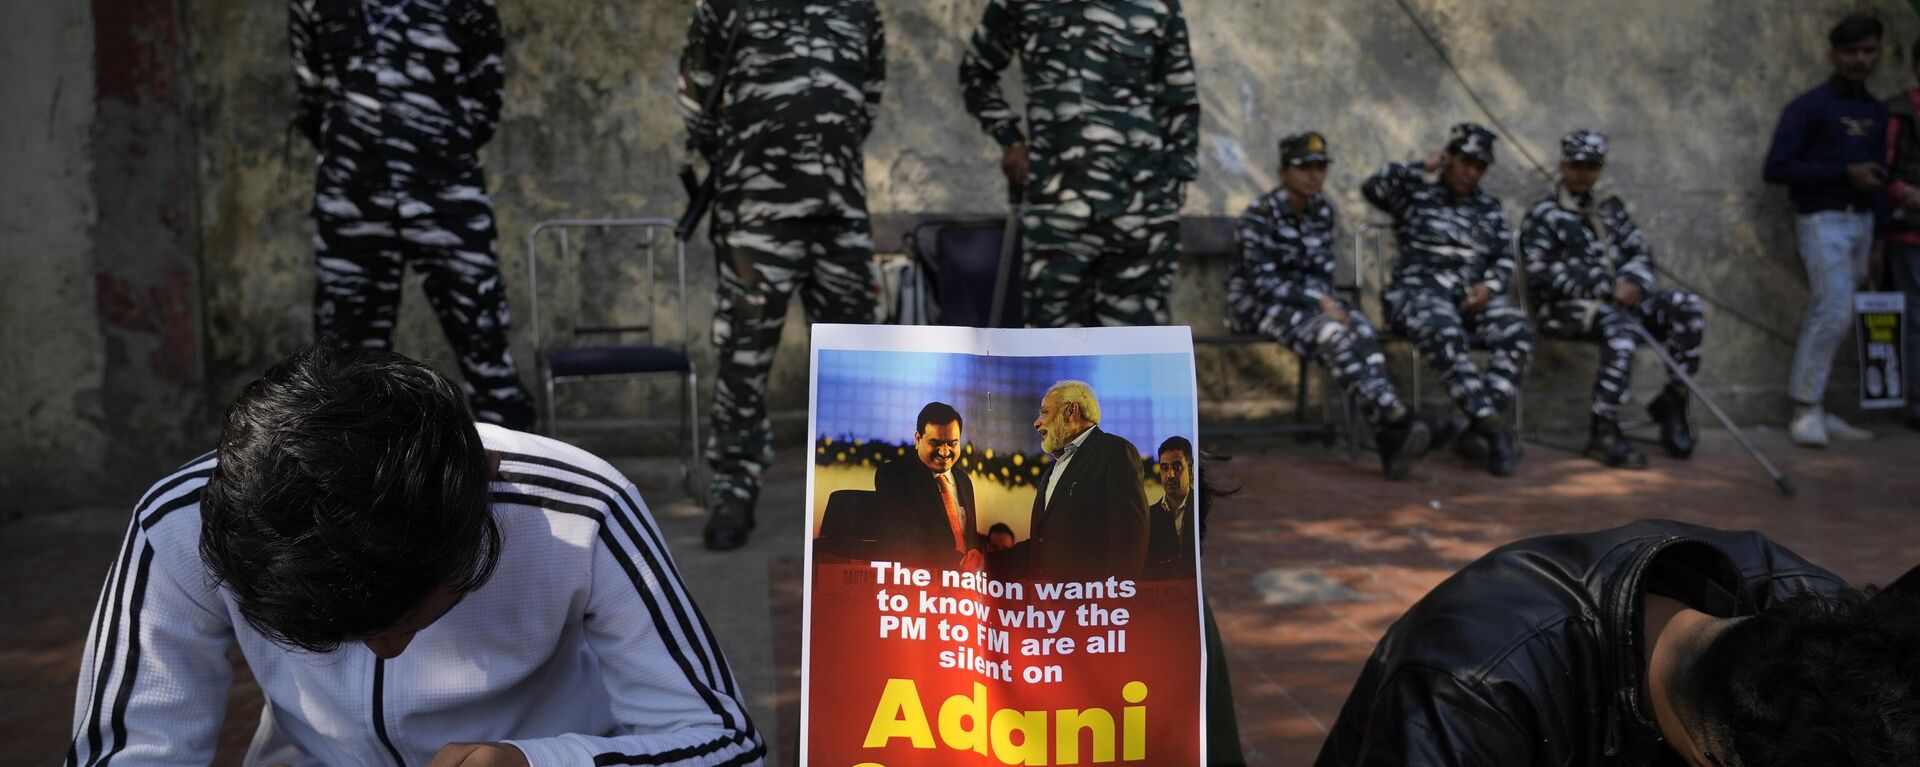 Members of opposition Congress party, demanding an investigation into allegations of fraud and stock manipulation by India's Adani Group display a placard with images of Indian businessman Gautam Adani and Indian Prime Minister Narendra Modi during a protest in New Delhi, India, Monday, Feb.6, 2023. - Sputnik India, 1920, 19.05.2023